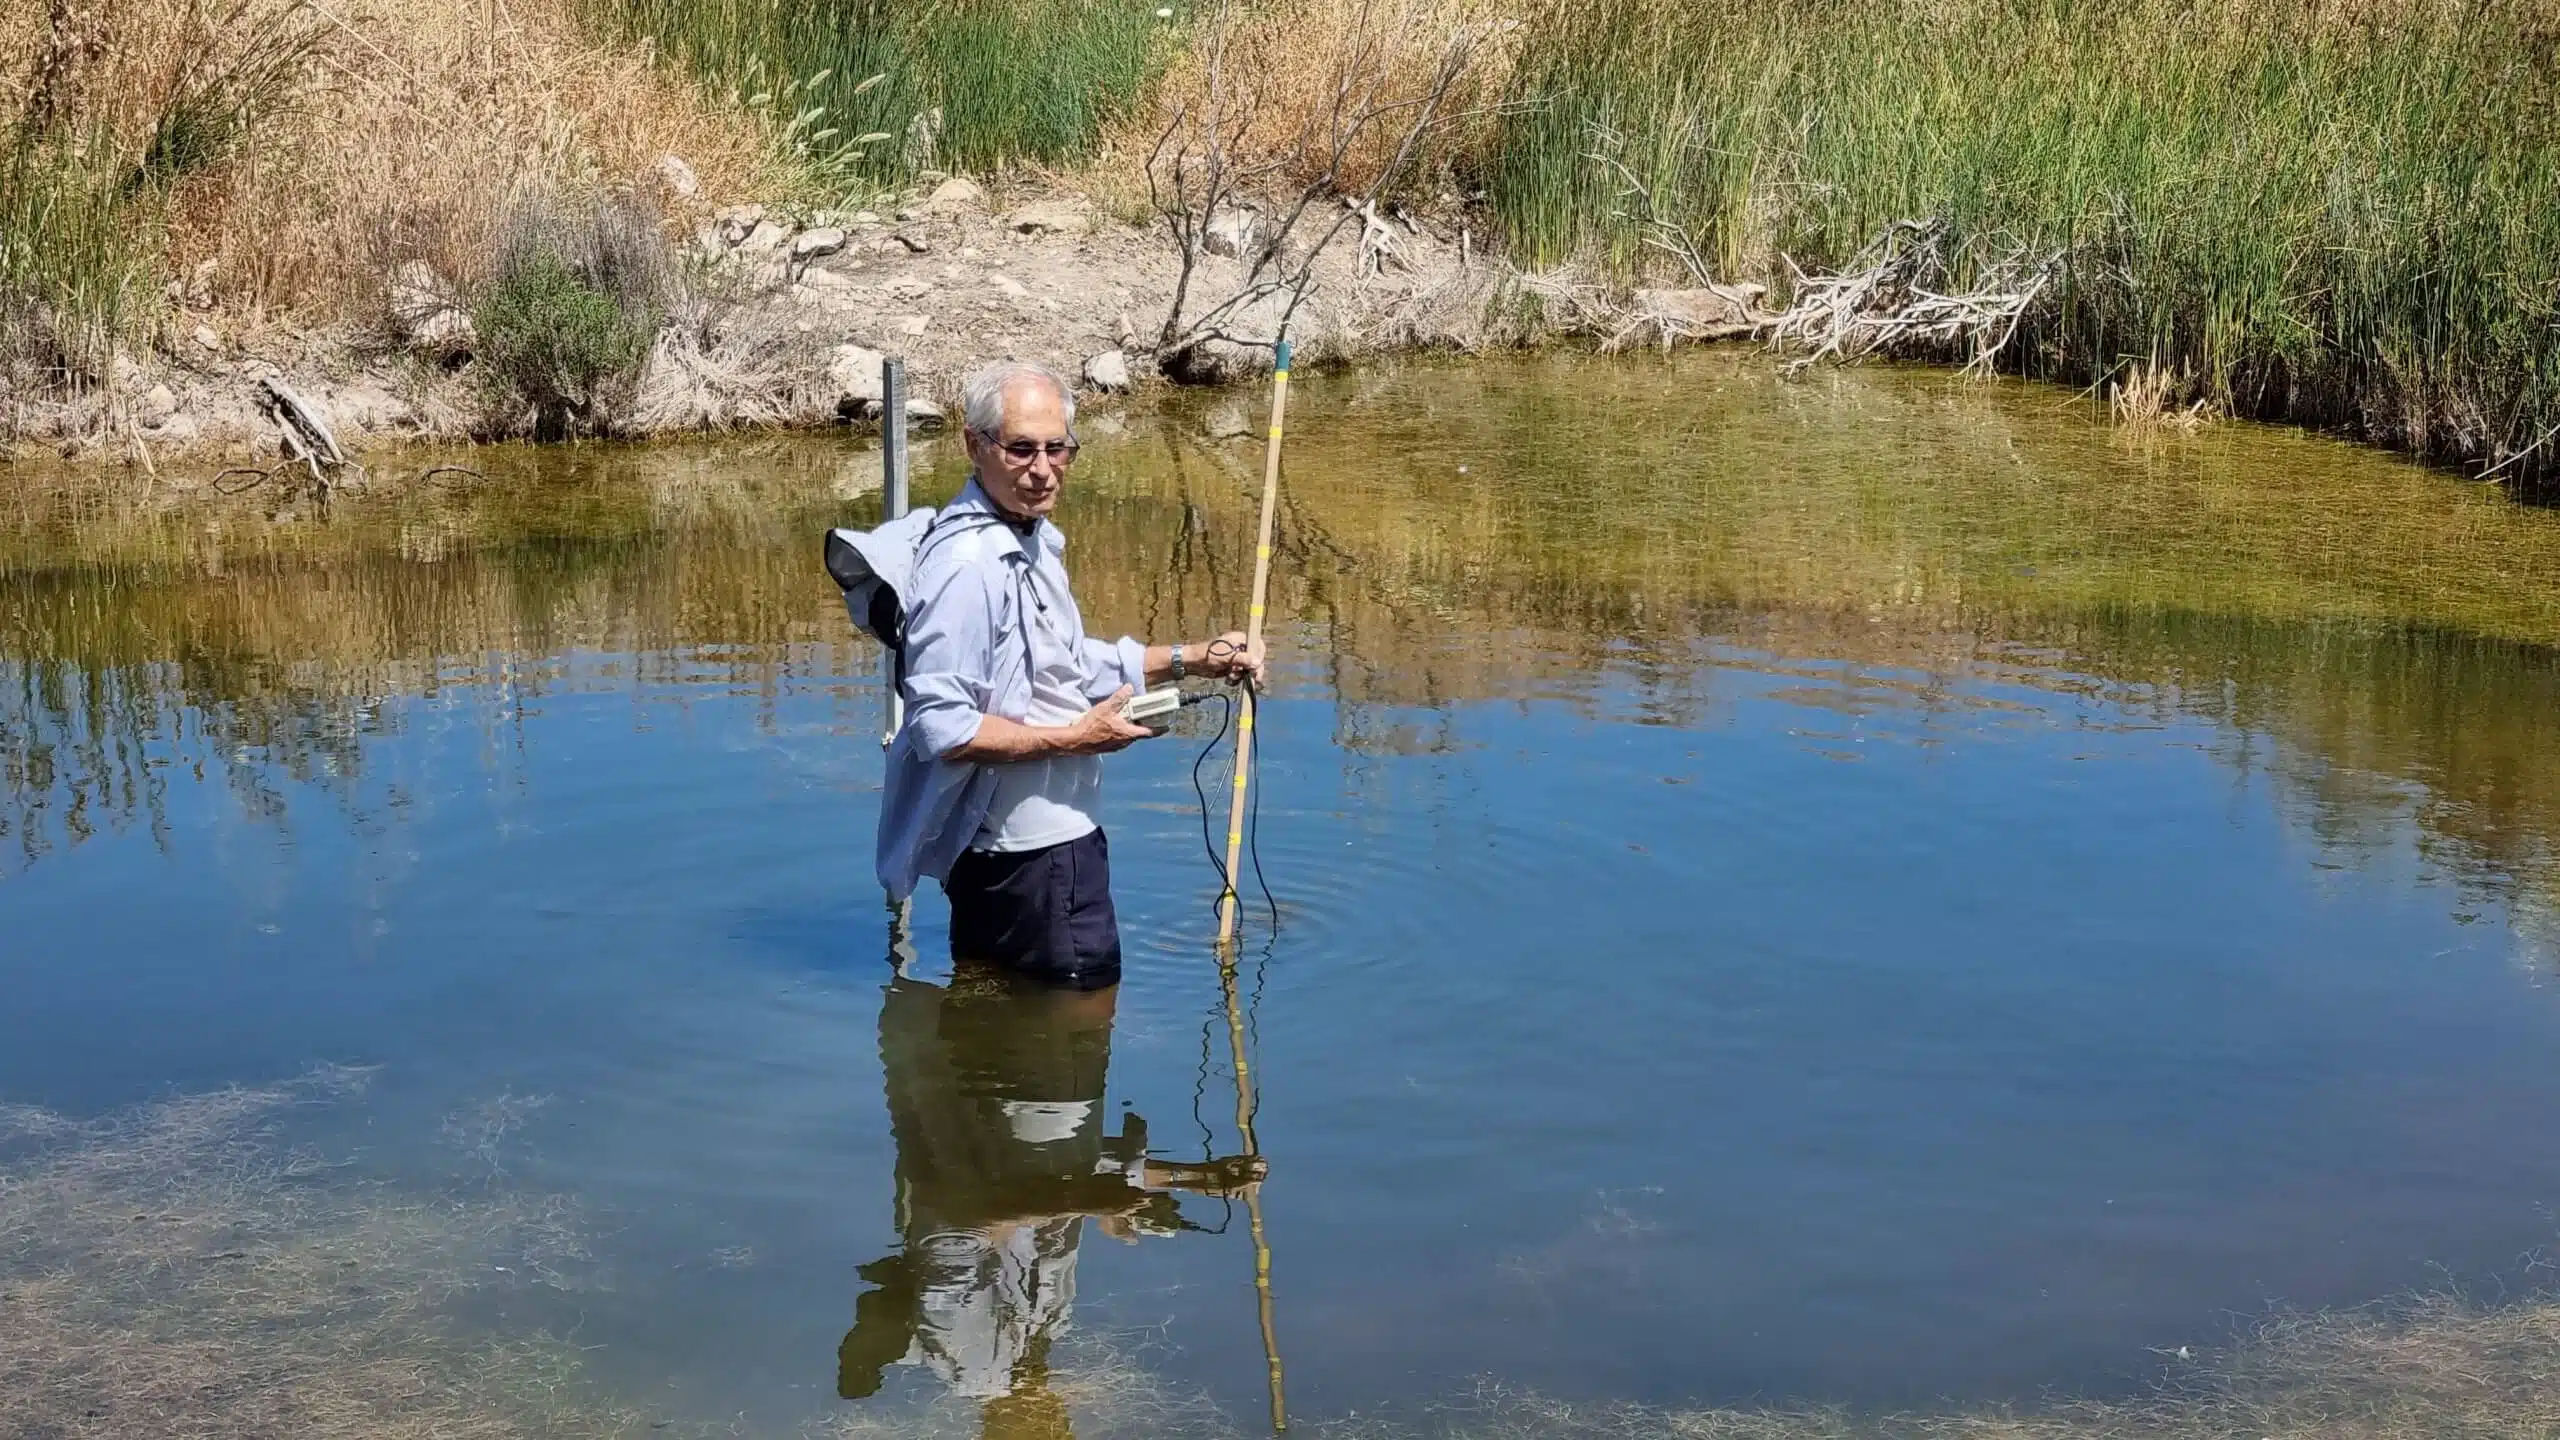 "I am connected to the winter pools, also emotionally - because engaging in them closes the circle that opened when I was a child collecting tadpoles from a puddle." Gazit during research in a winter pool in Haifa. Photo: Dr. Eldad Elron